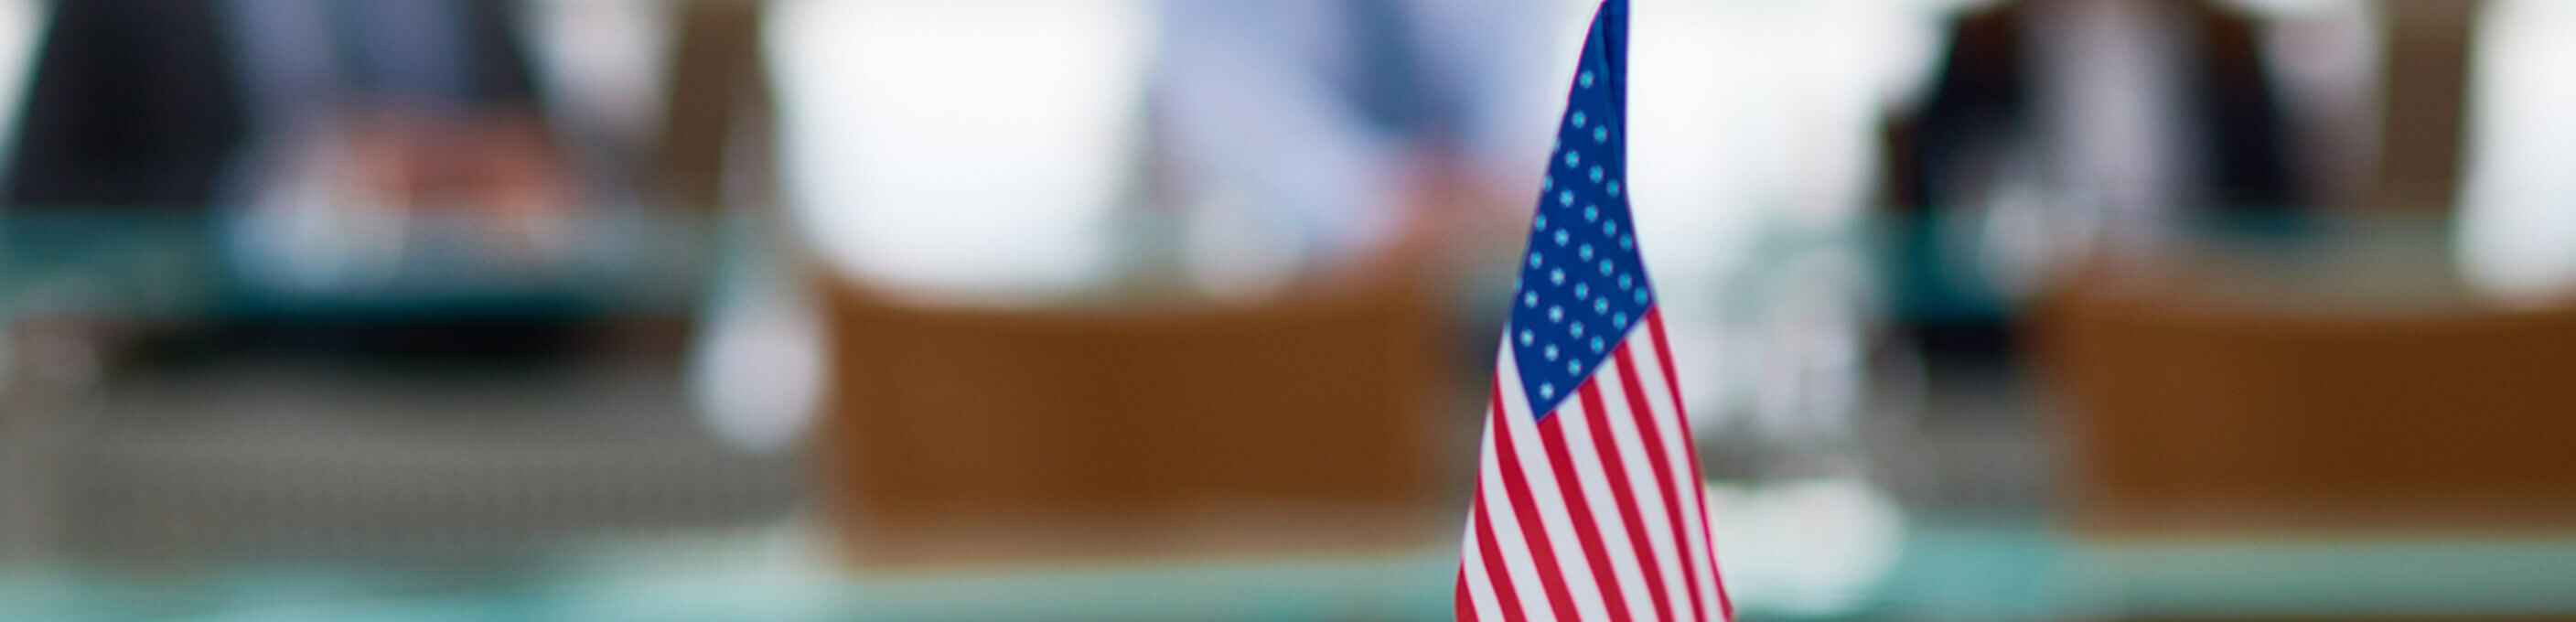 An American flag on a desk with meeting attendees blurred in the background. 